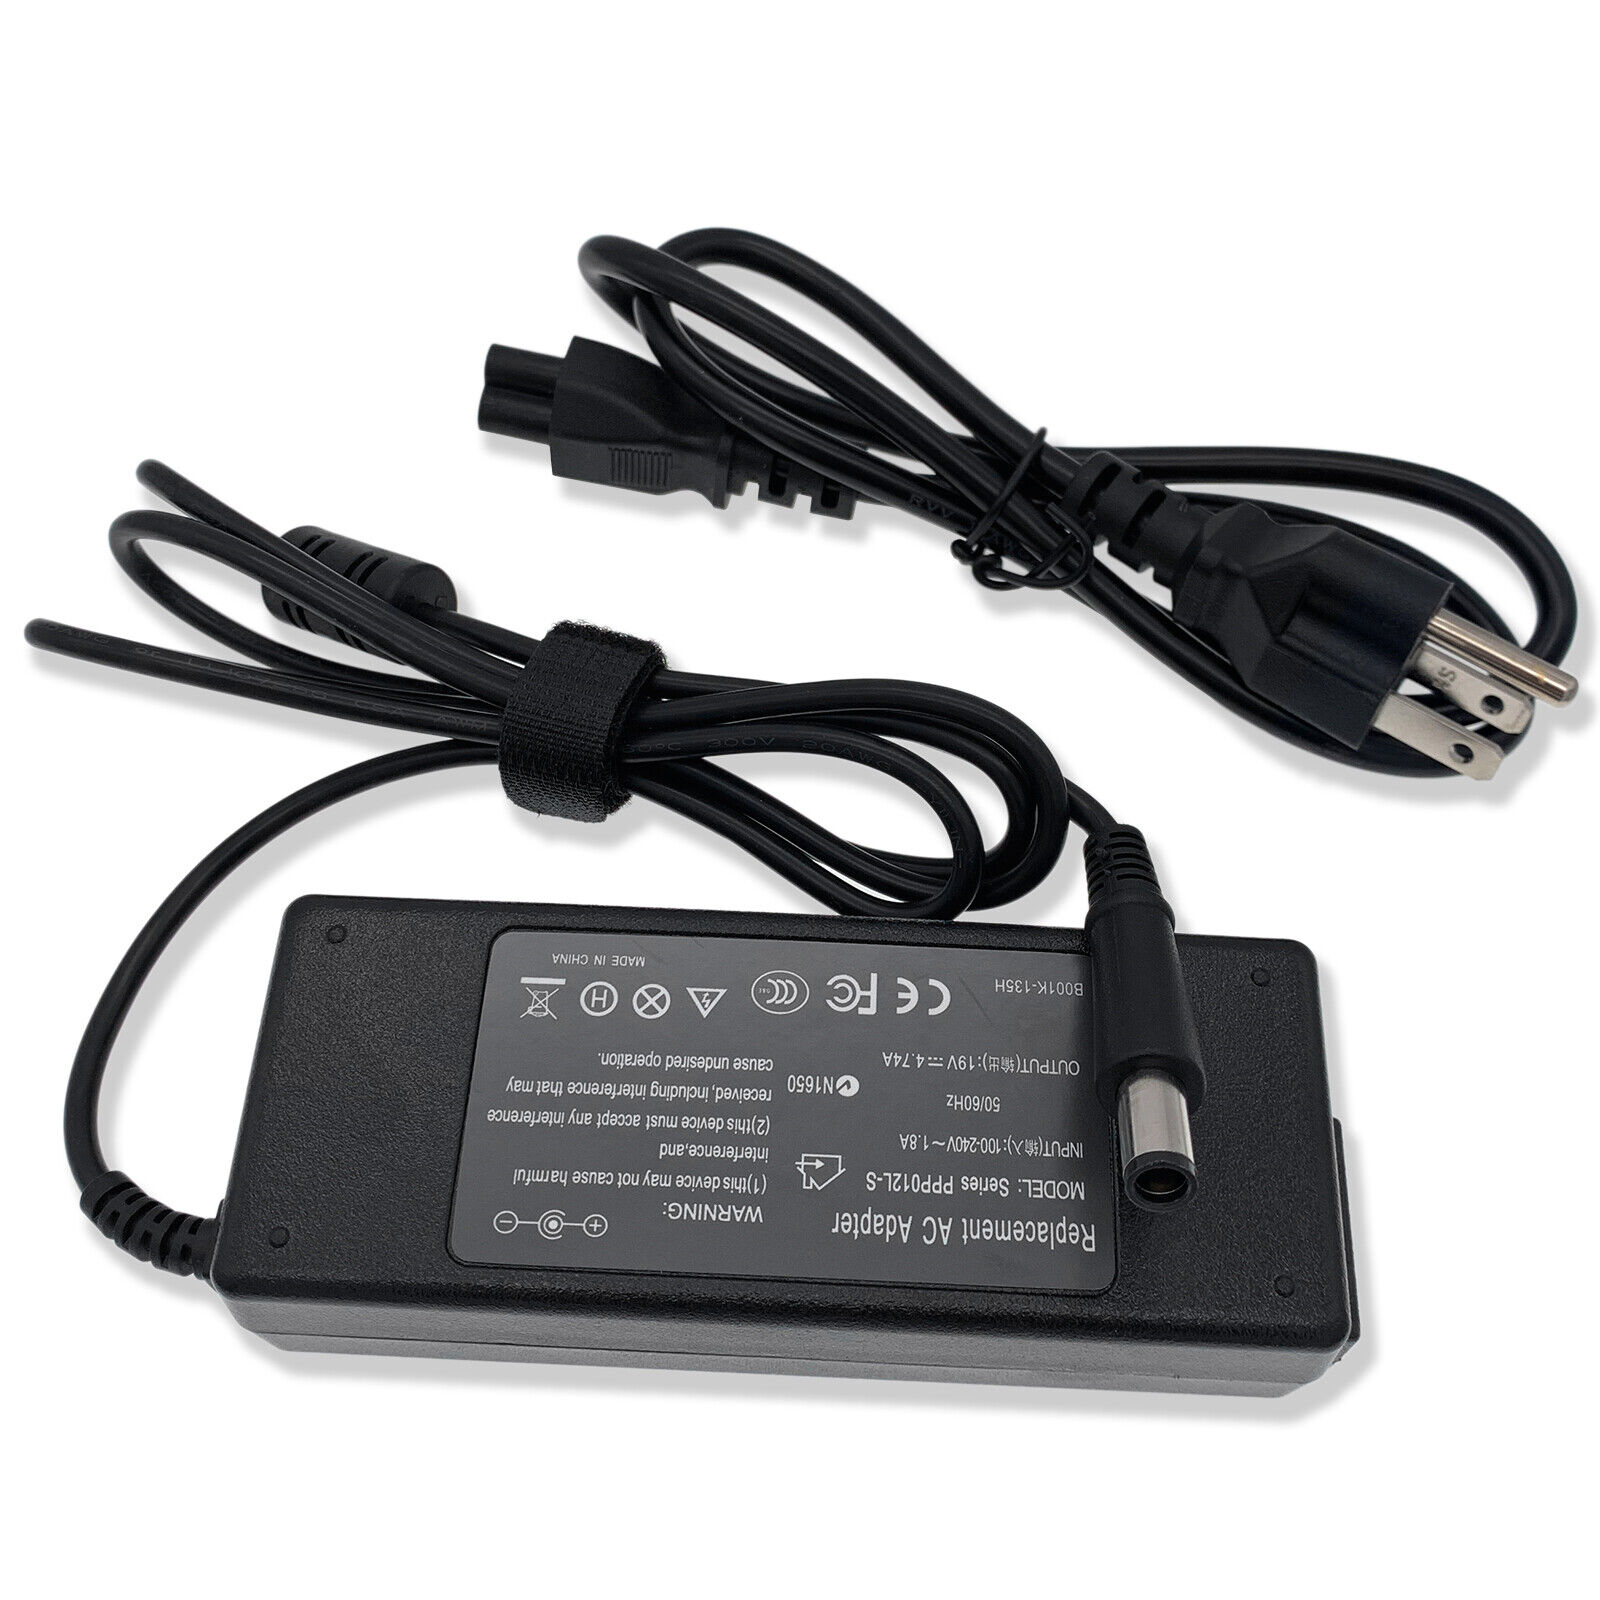 19V 90W AC Adapter Charger Power Supply Cord for HP EliteBook 8540p 8540w 8740w